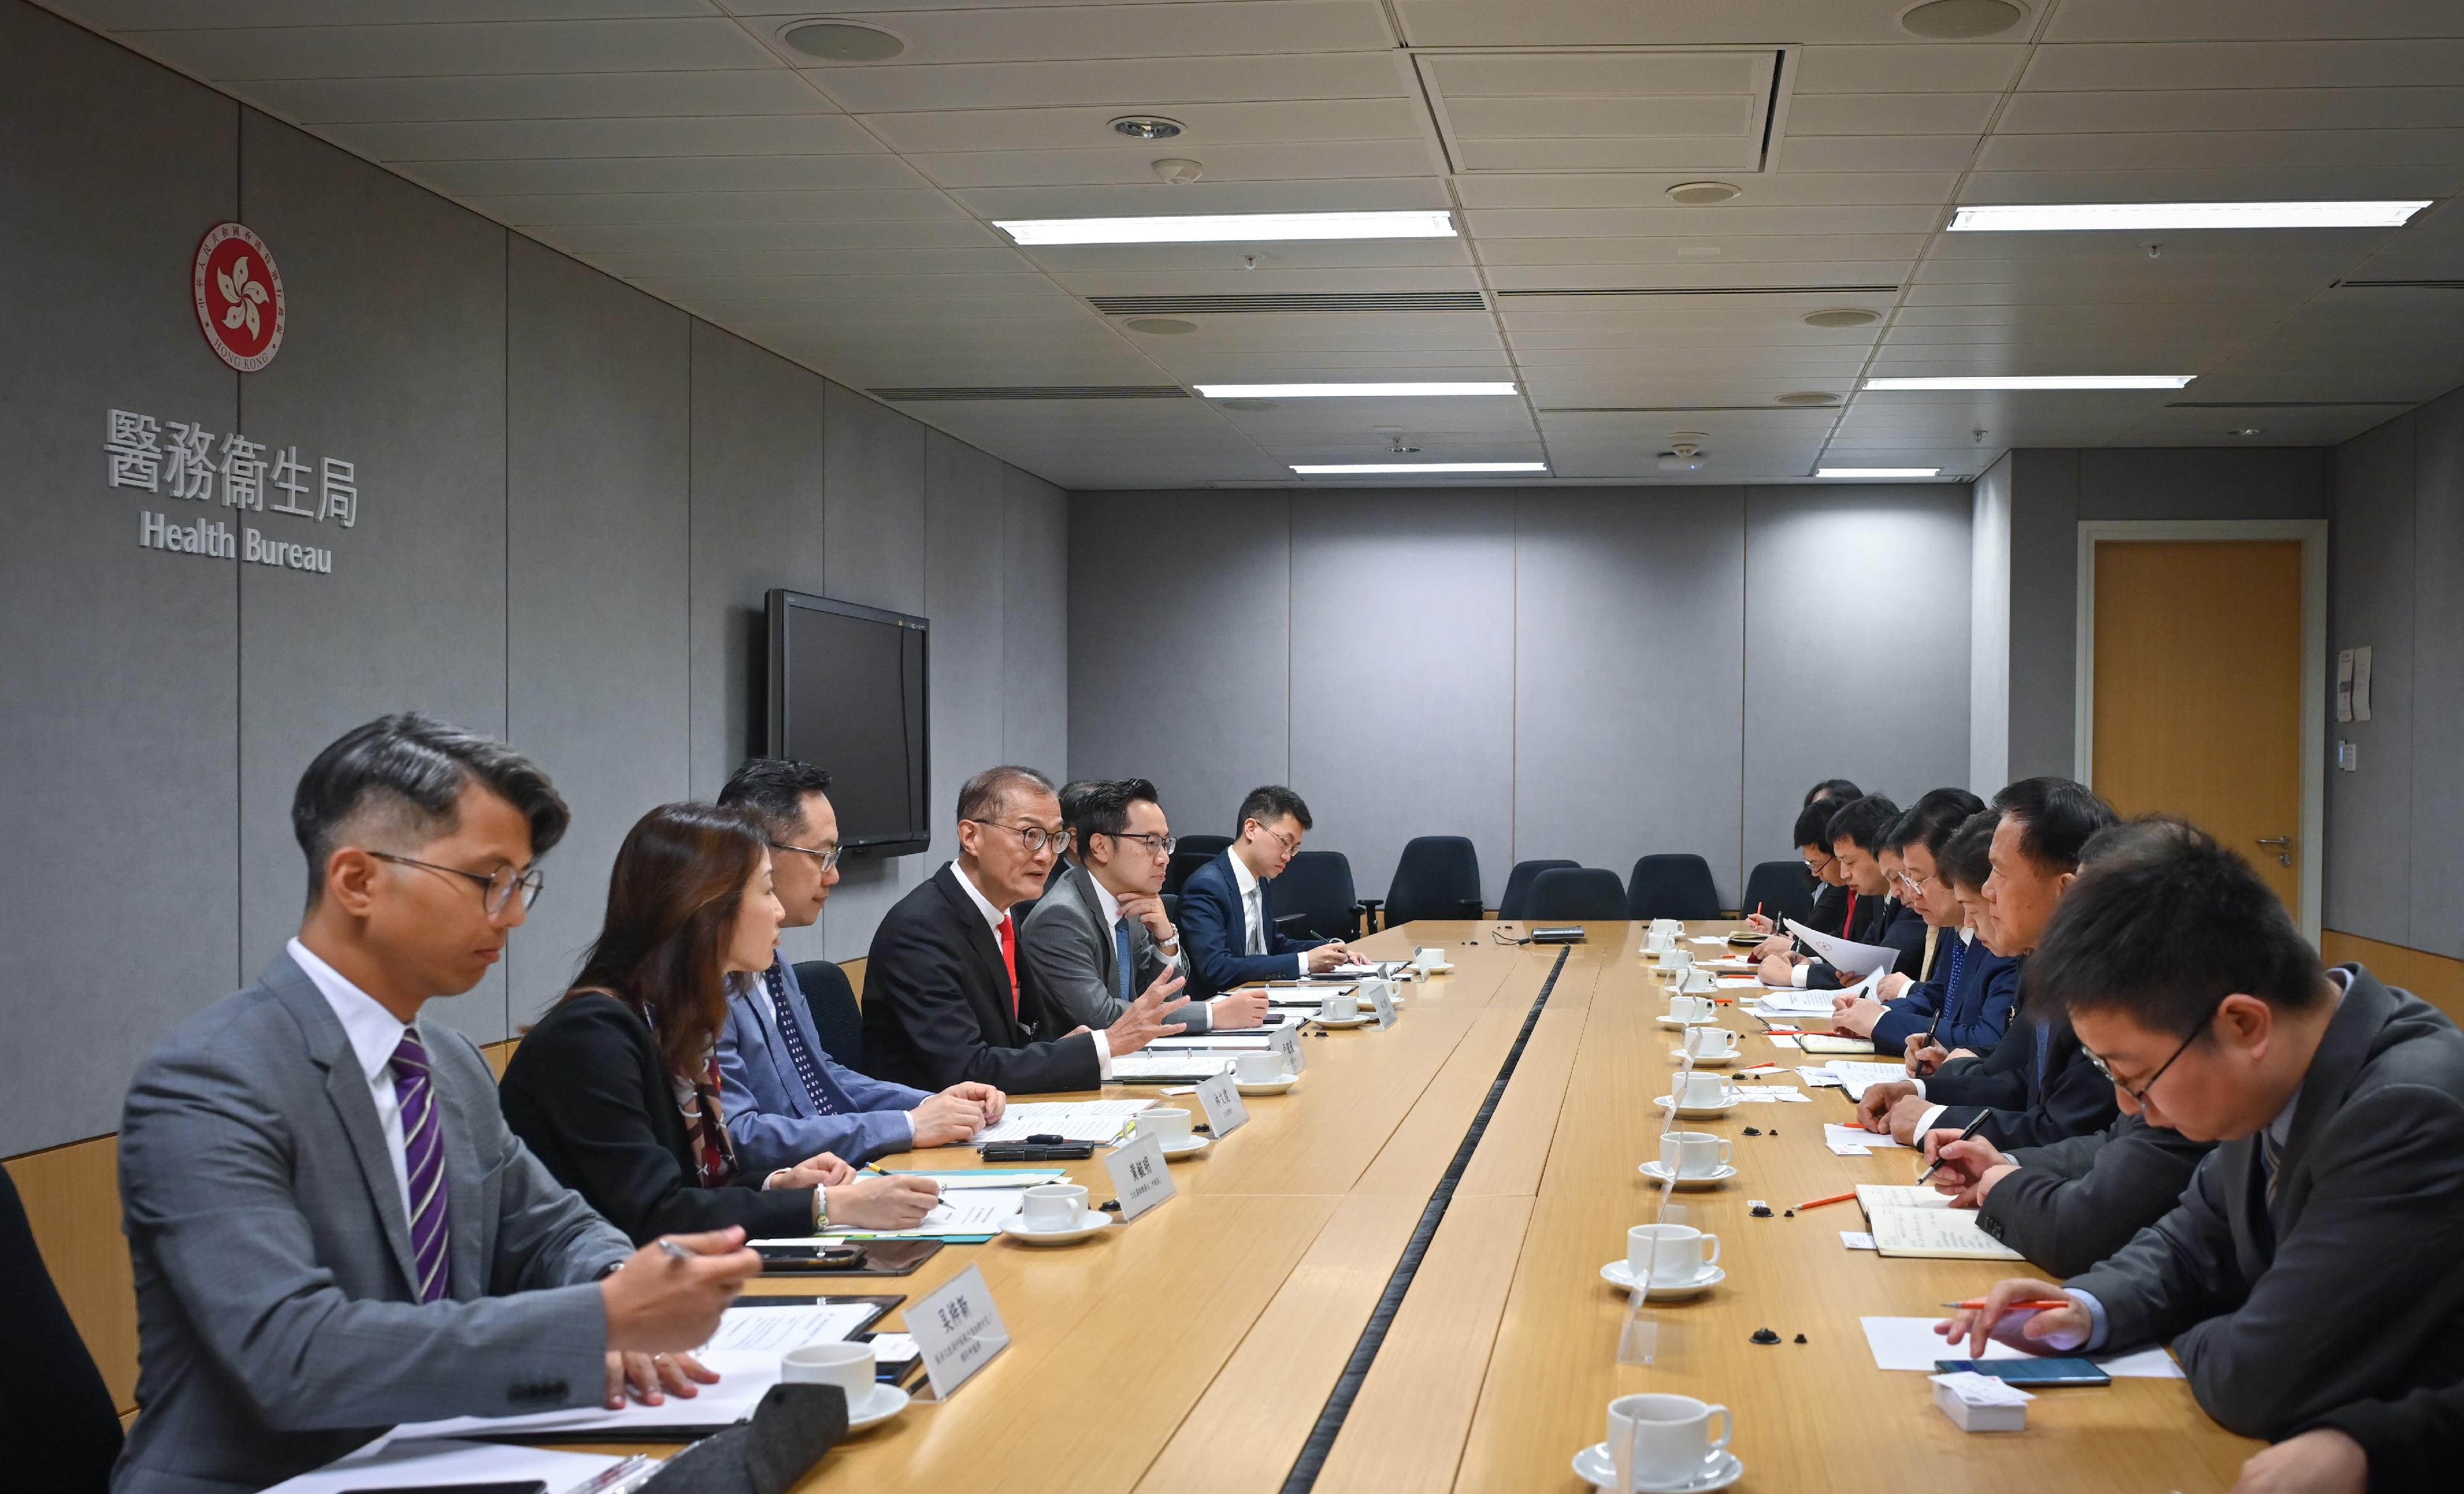 The Secretary for Health, Professor Lo Chung-mau (fourth left), met with a delegation led by Vice Chairperson of the Hunan Provincial Committee of the Chinese People's Political Consultative Conference Ms Xiao Bailing (fourth right) at the Central Government Offices today (April 18). The Director of Health, Dr Ronald Lam (third left), and Deputy Secretary for Health Mr Eddie Lee (fifth left) also attended.